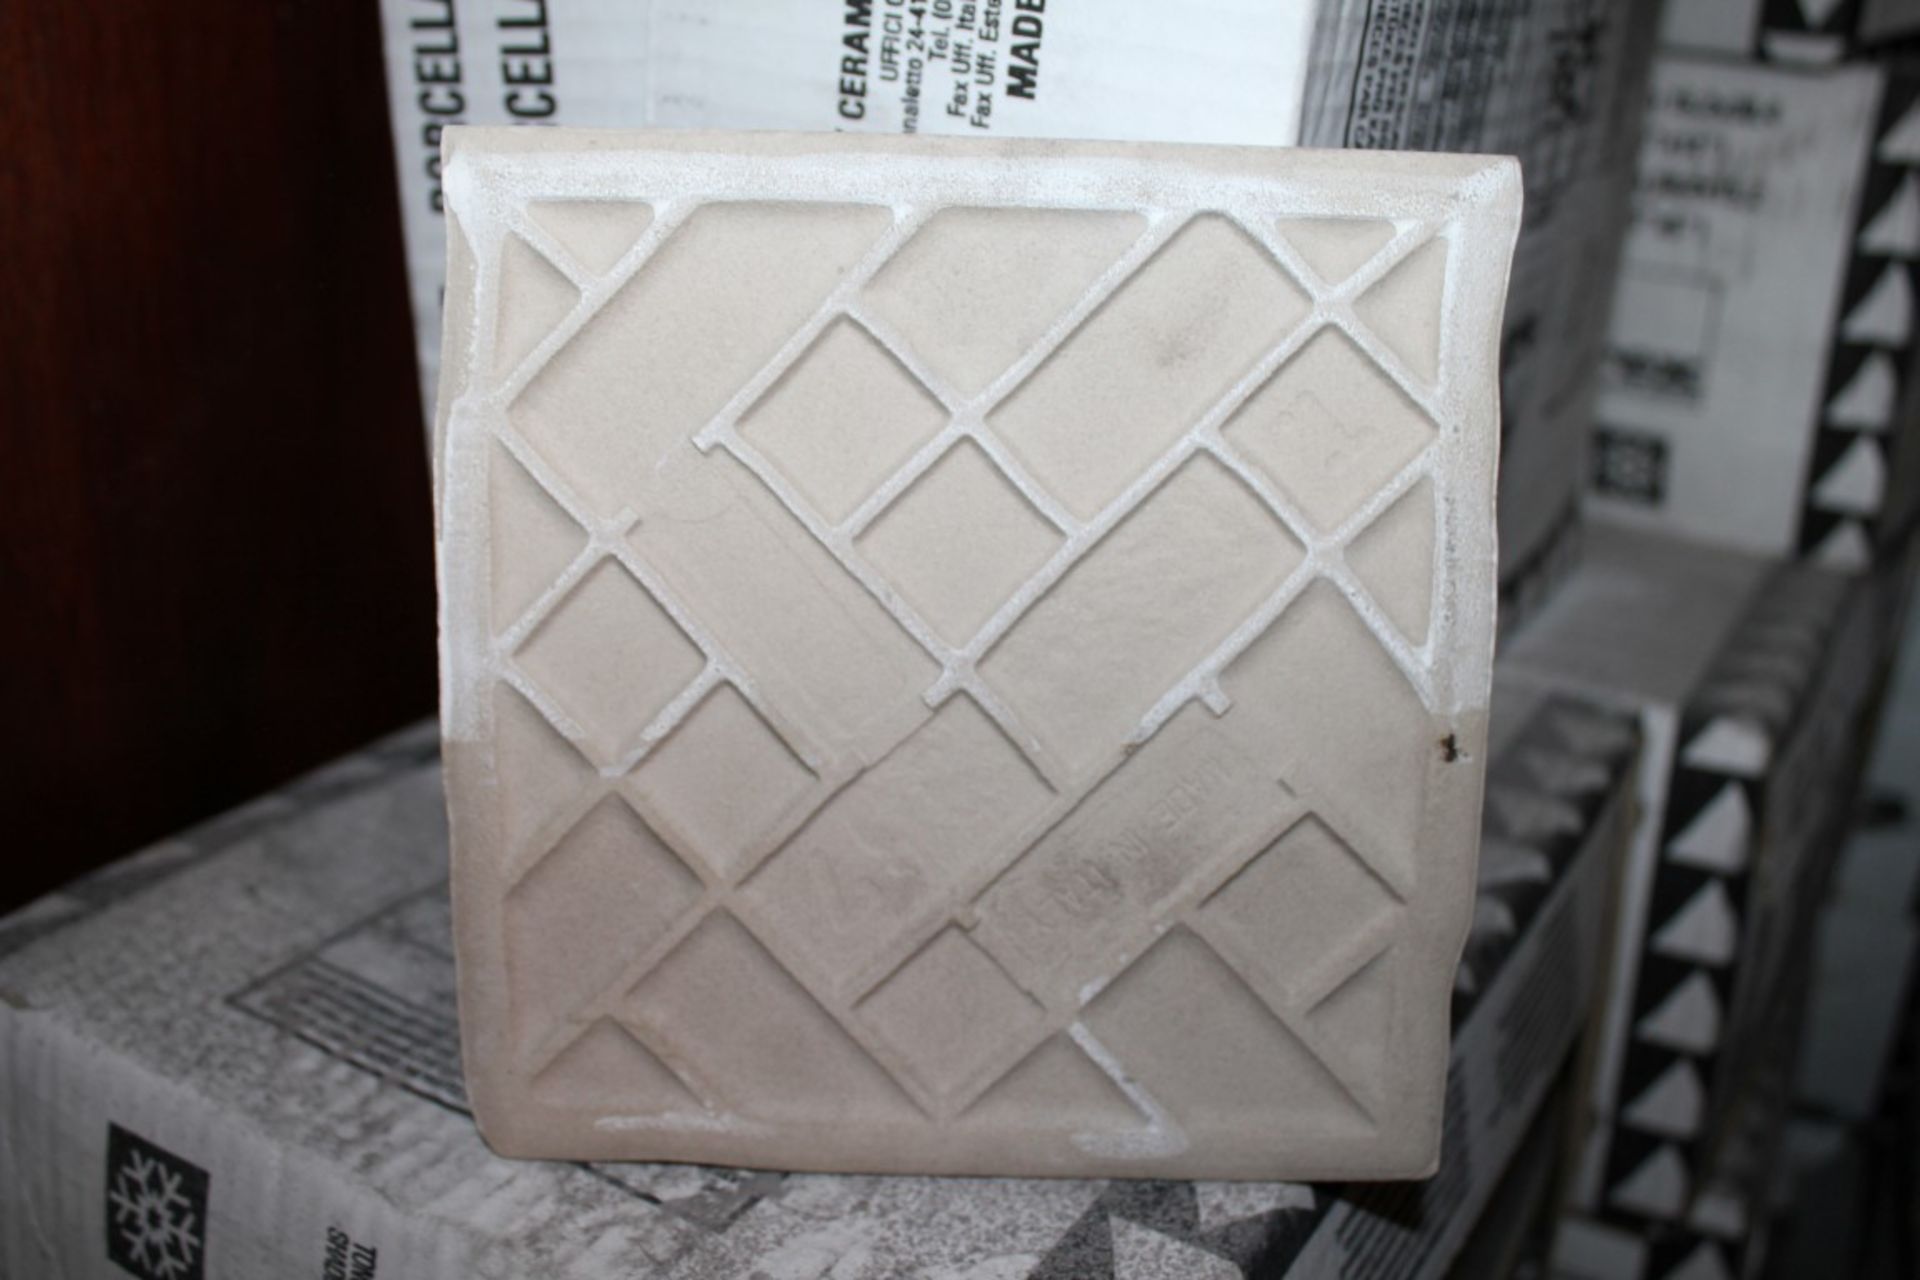 16 x Boxes of Rex Ceramiche Artistiche Wall Tiles - Lot Includes 16 Boxes of 40 Tiles - Tile Size 15 - Image 4 of 5